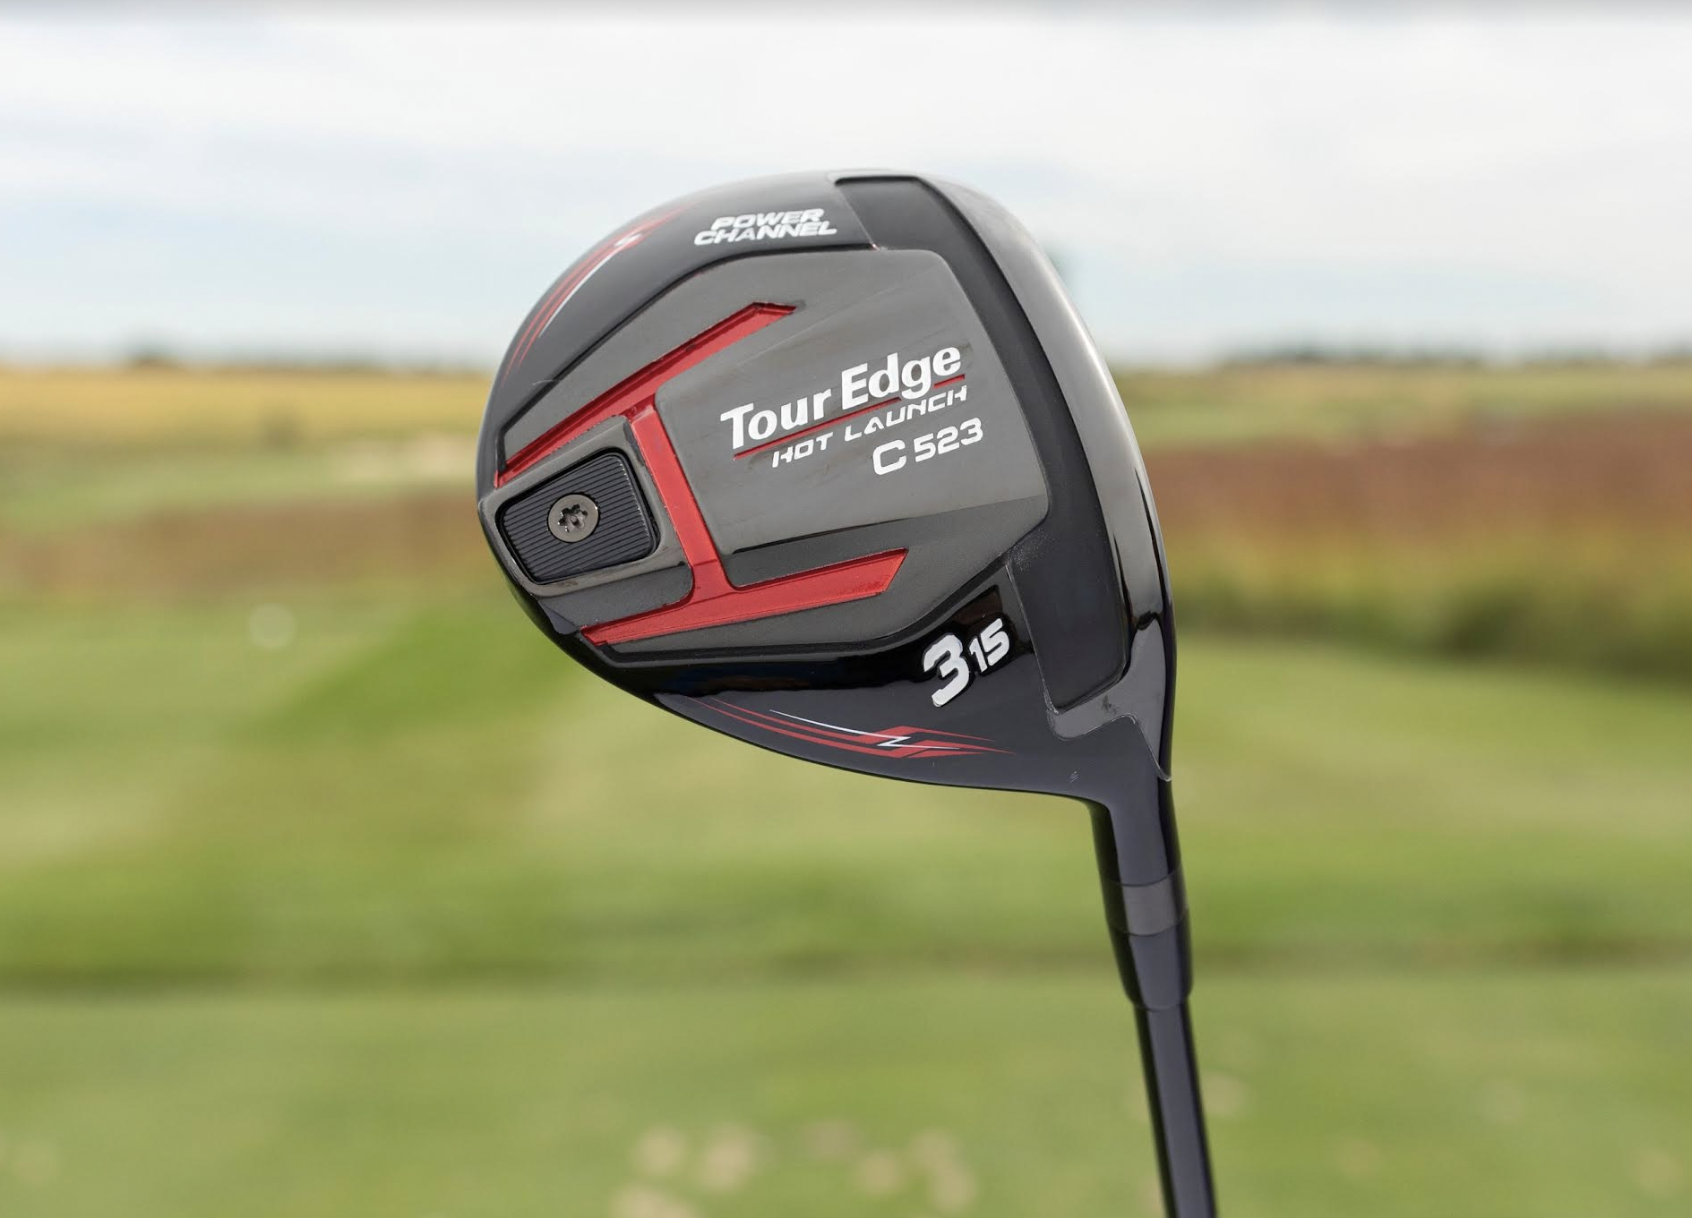 Tour Edge launches new Hot Launch 523 series drivers, woods and